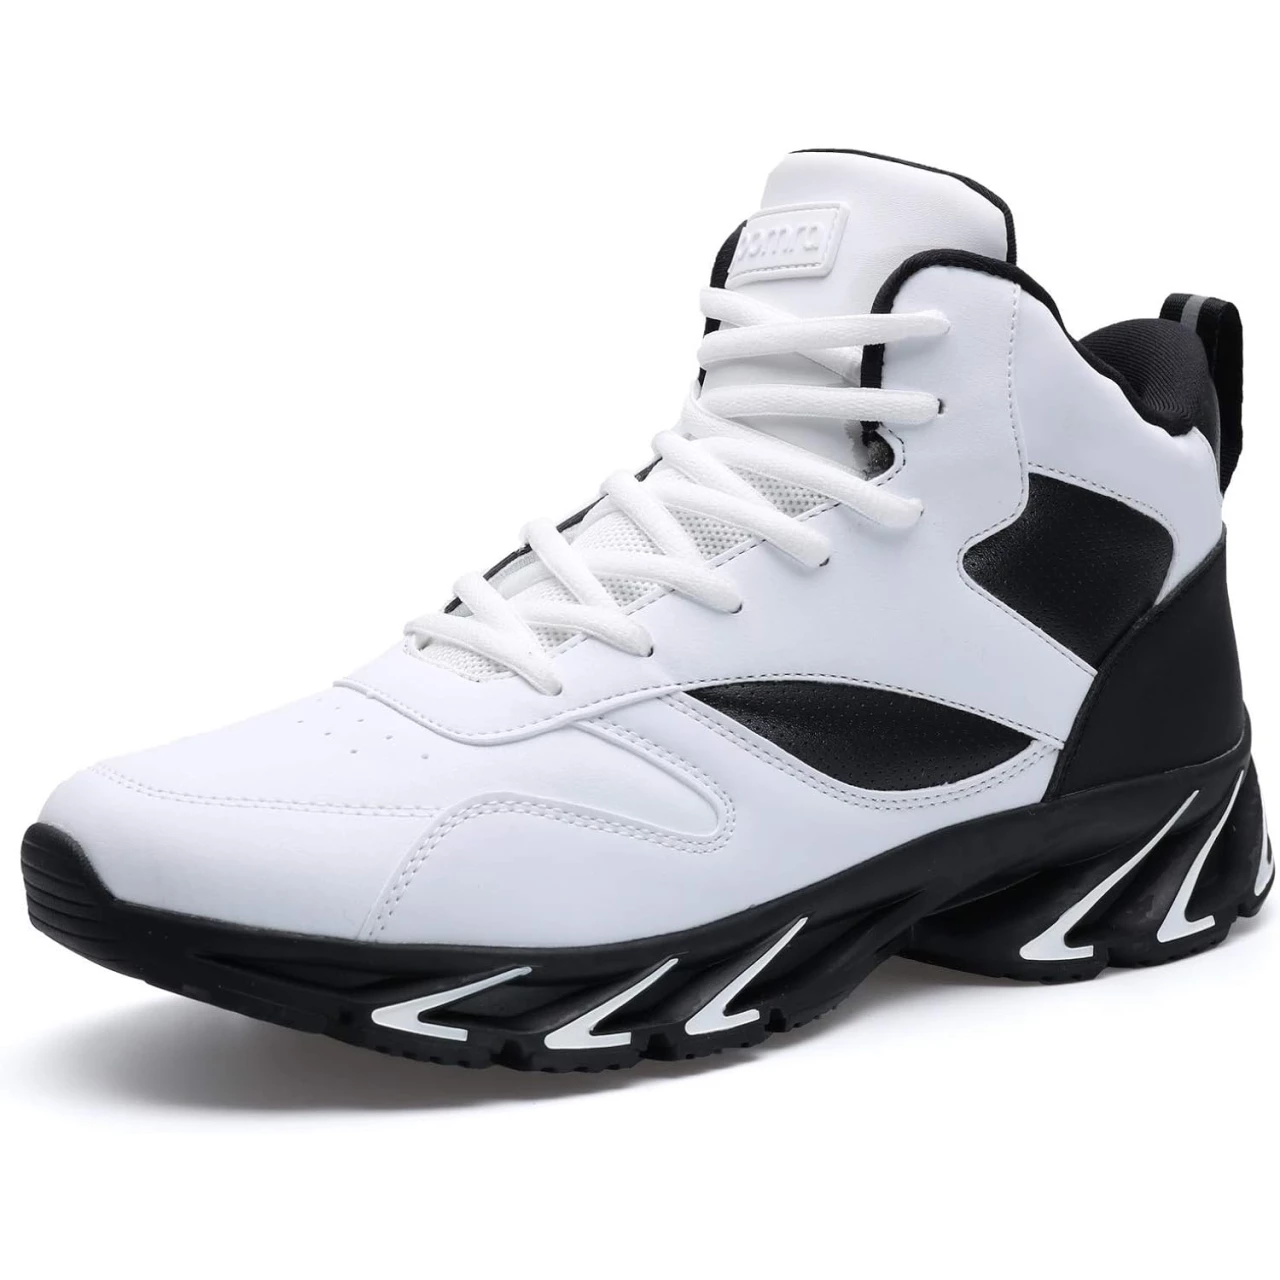 Joomra Men&rsquo;s Stylish Sneakers High Top Athletic-Inspired Shoes